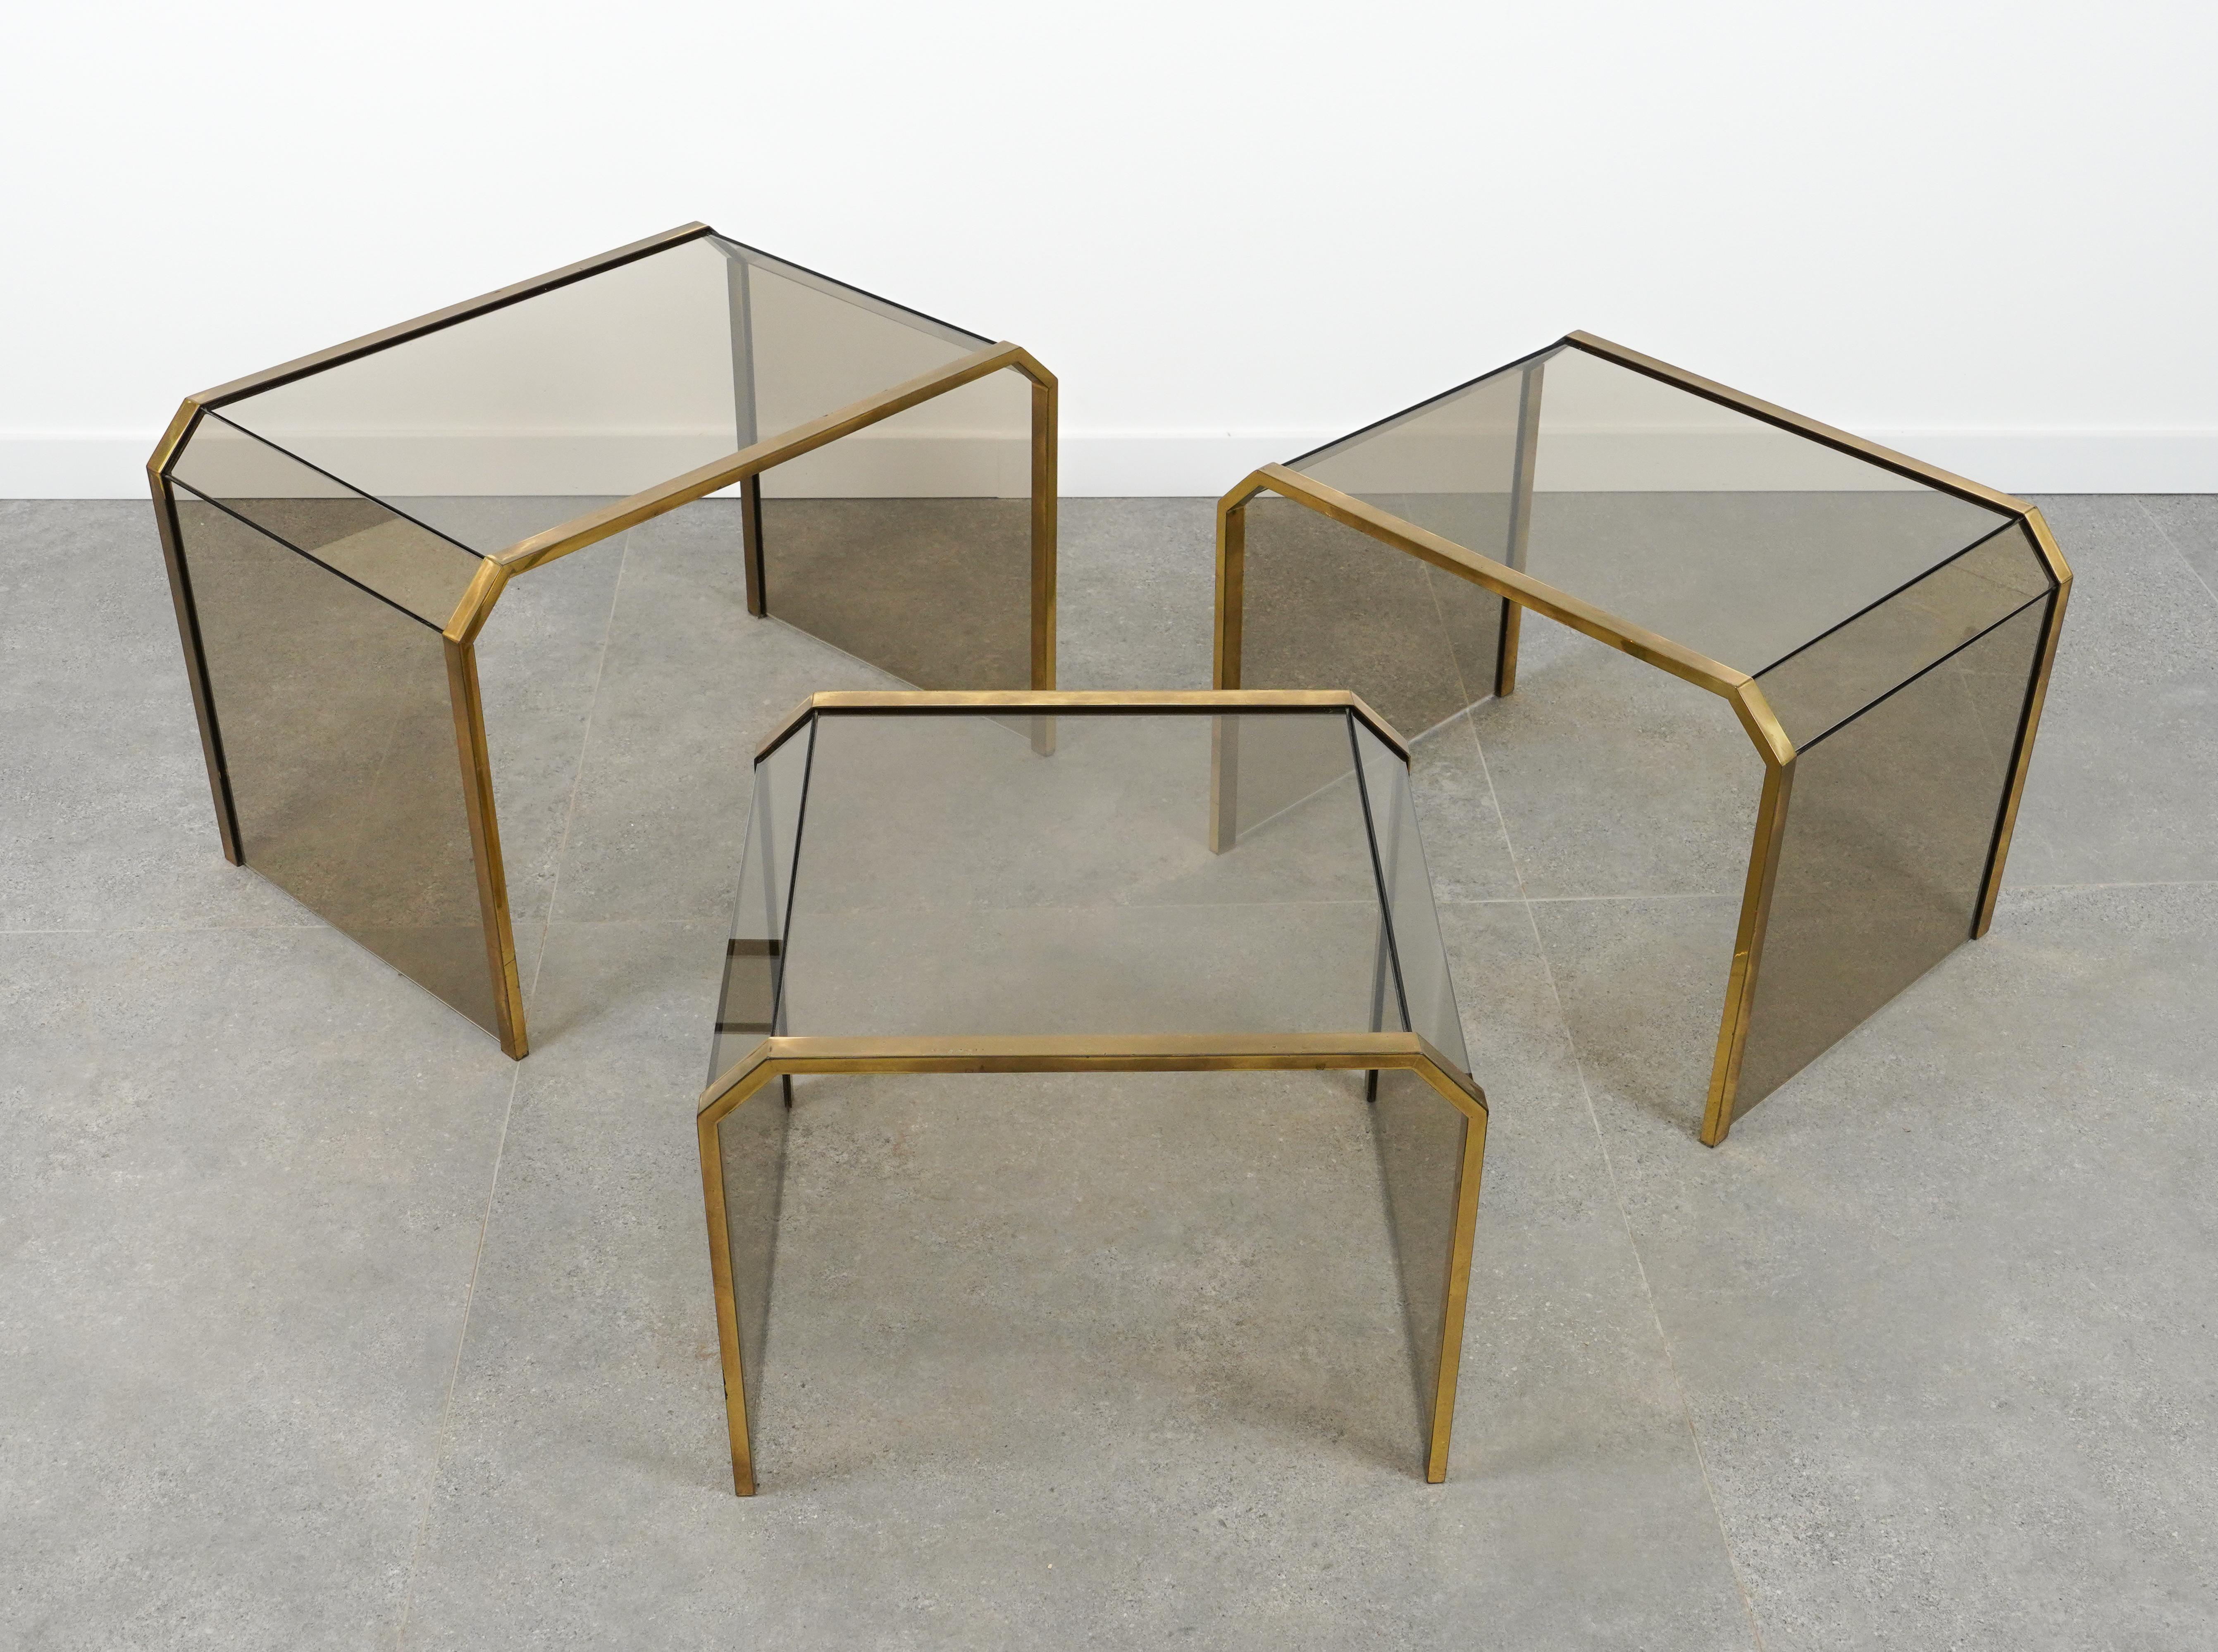 Brass & Glass Set of Three Nesting Tables Gallotti & Radice Style, Italy 1970s For Sale 11